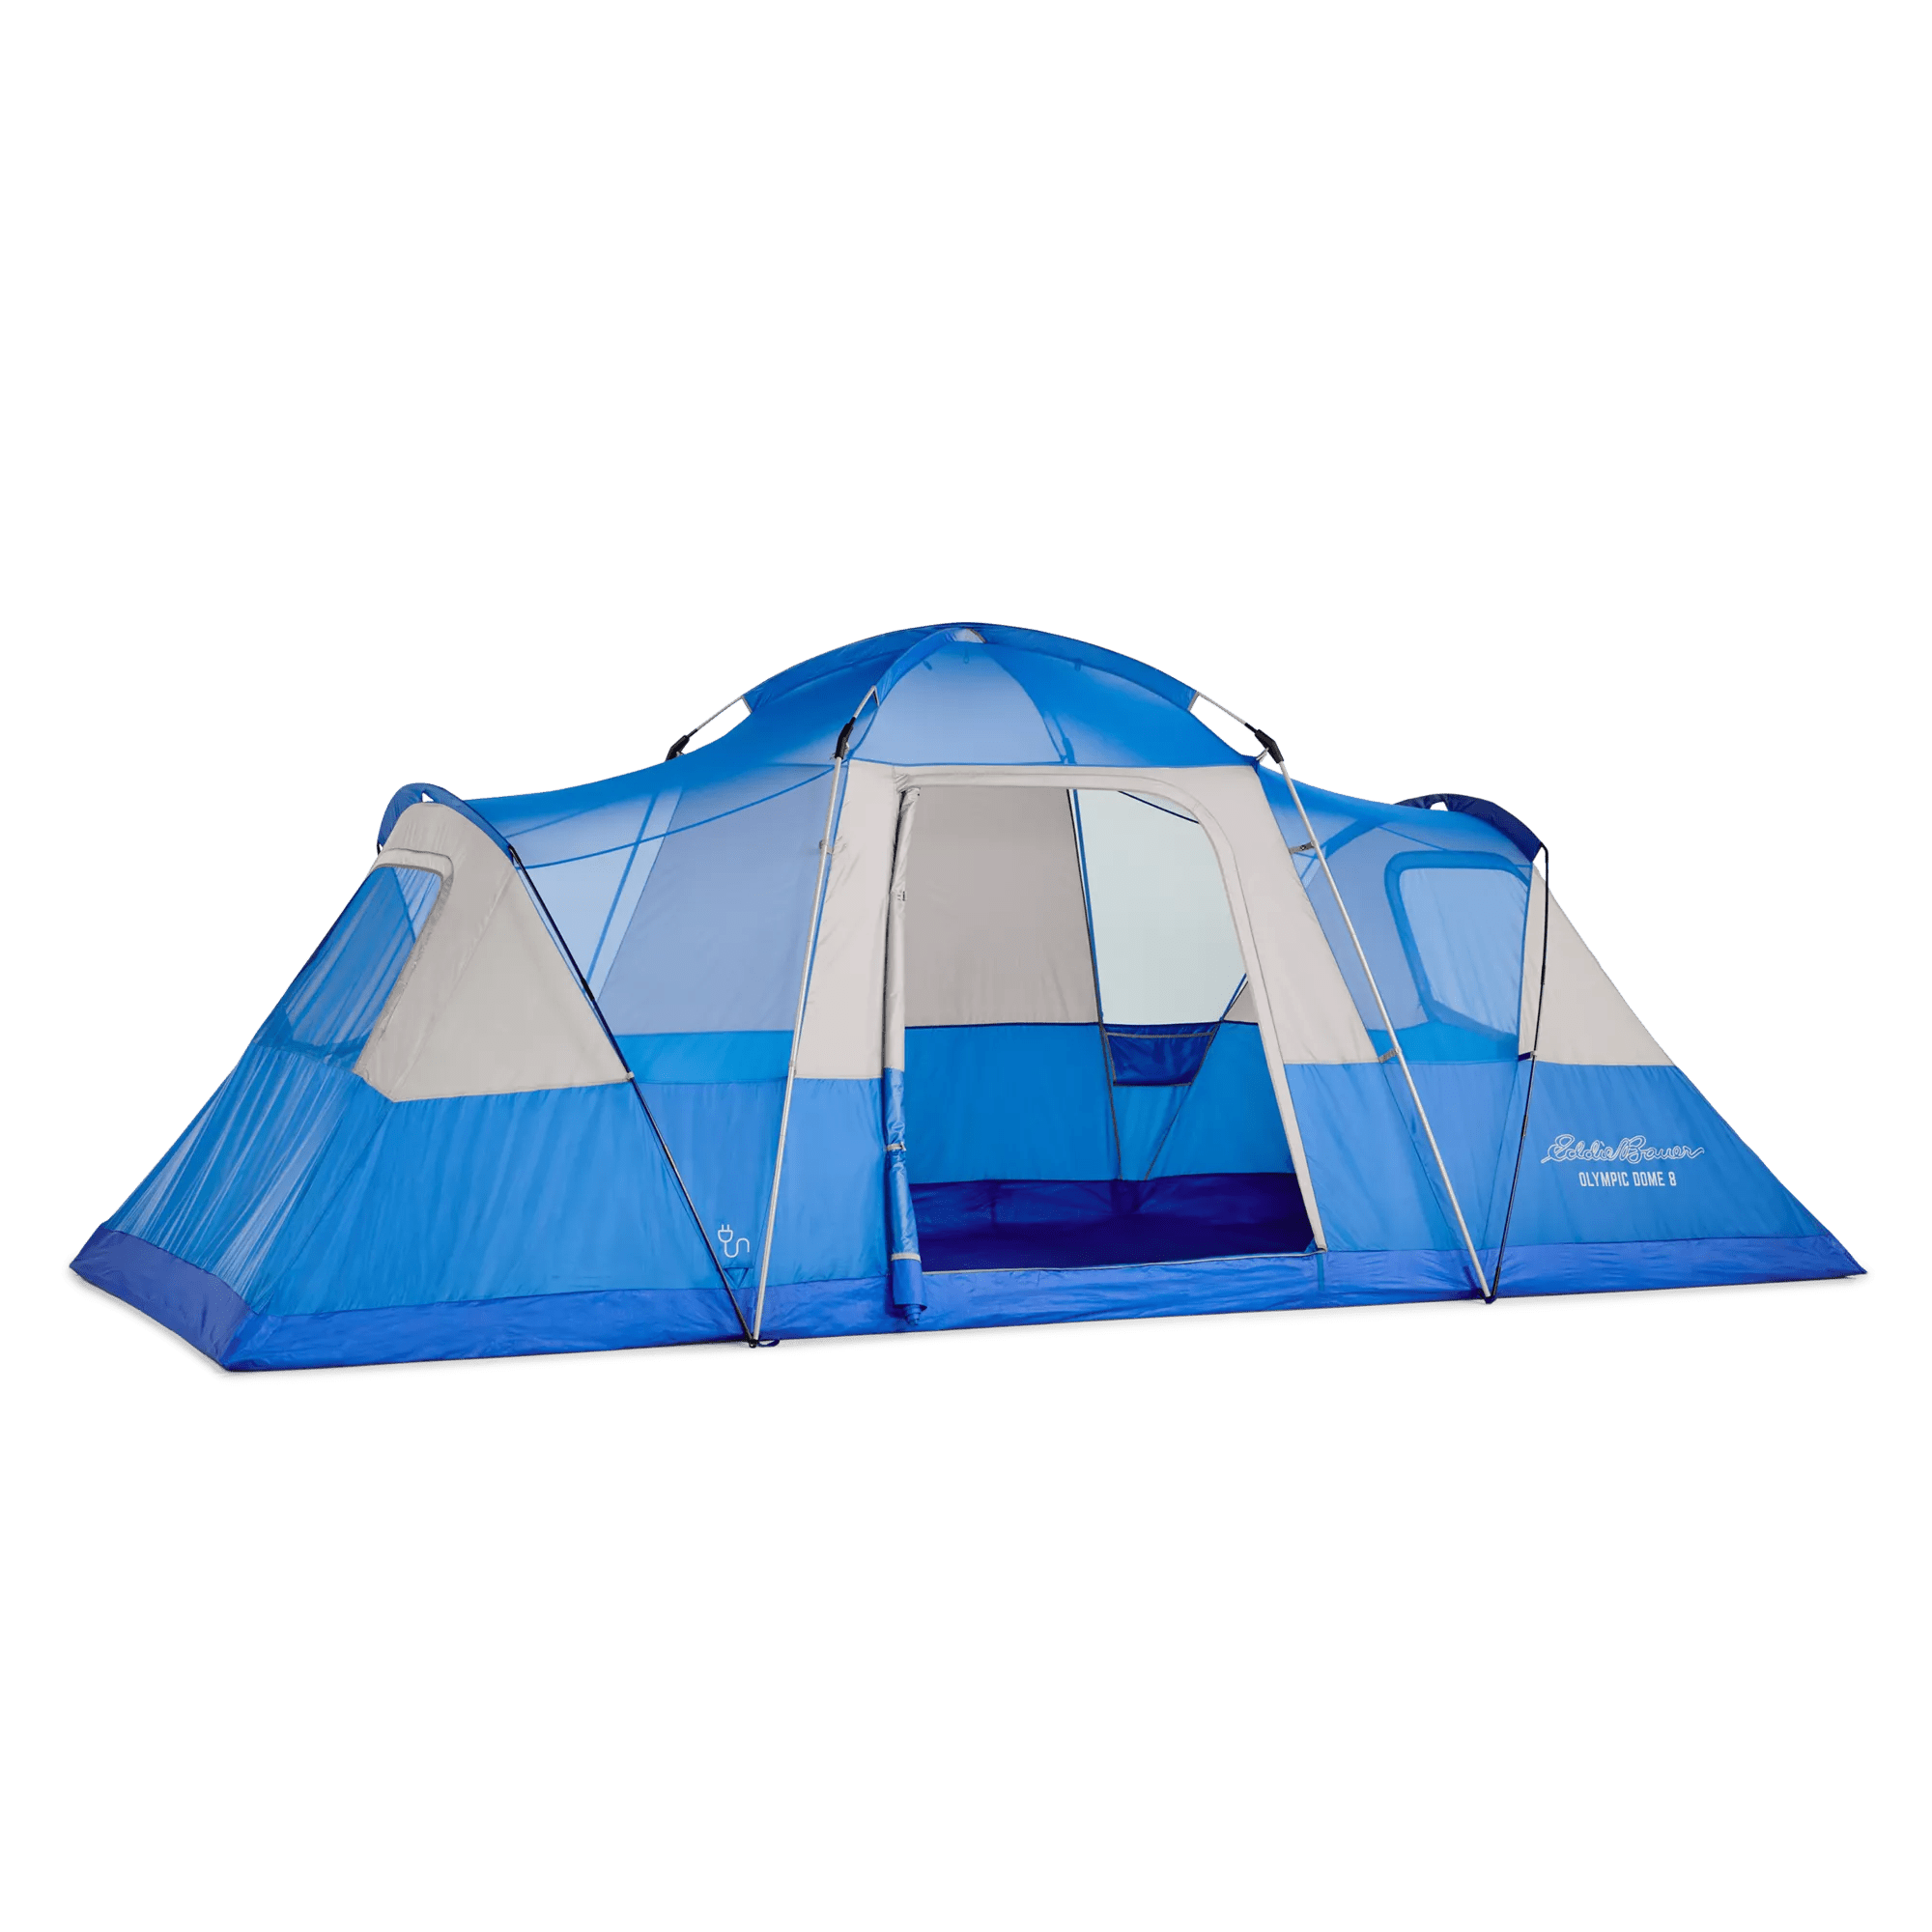 Olympic Dome 8 Tent